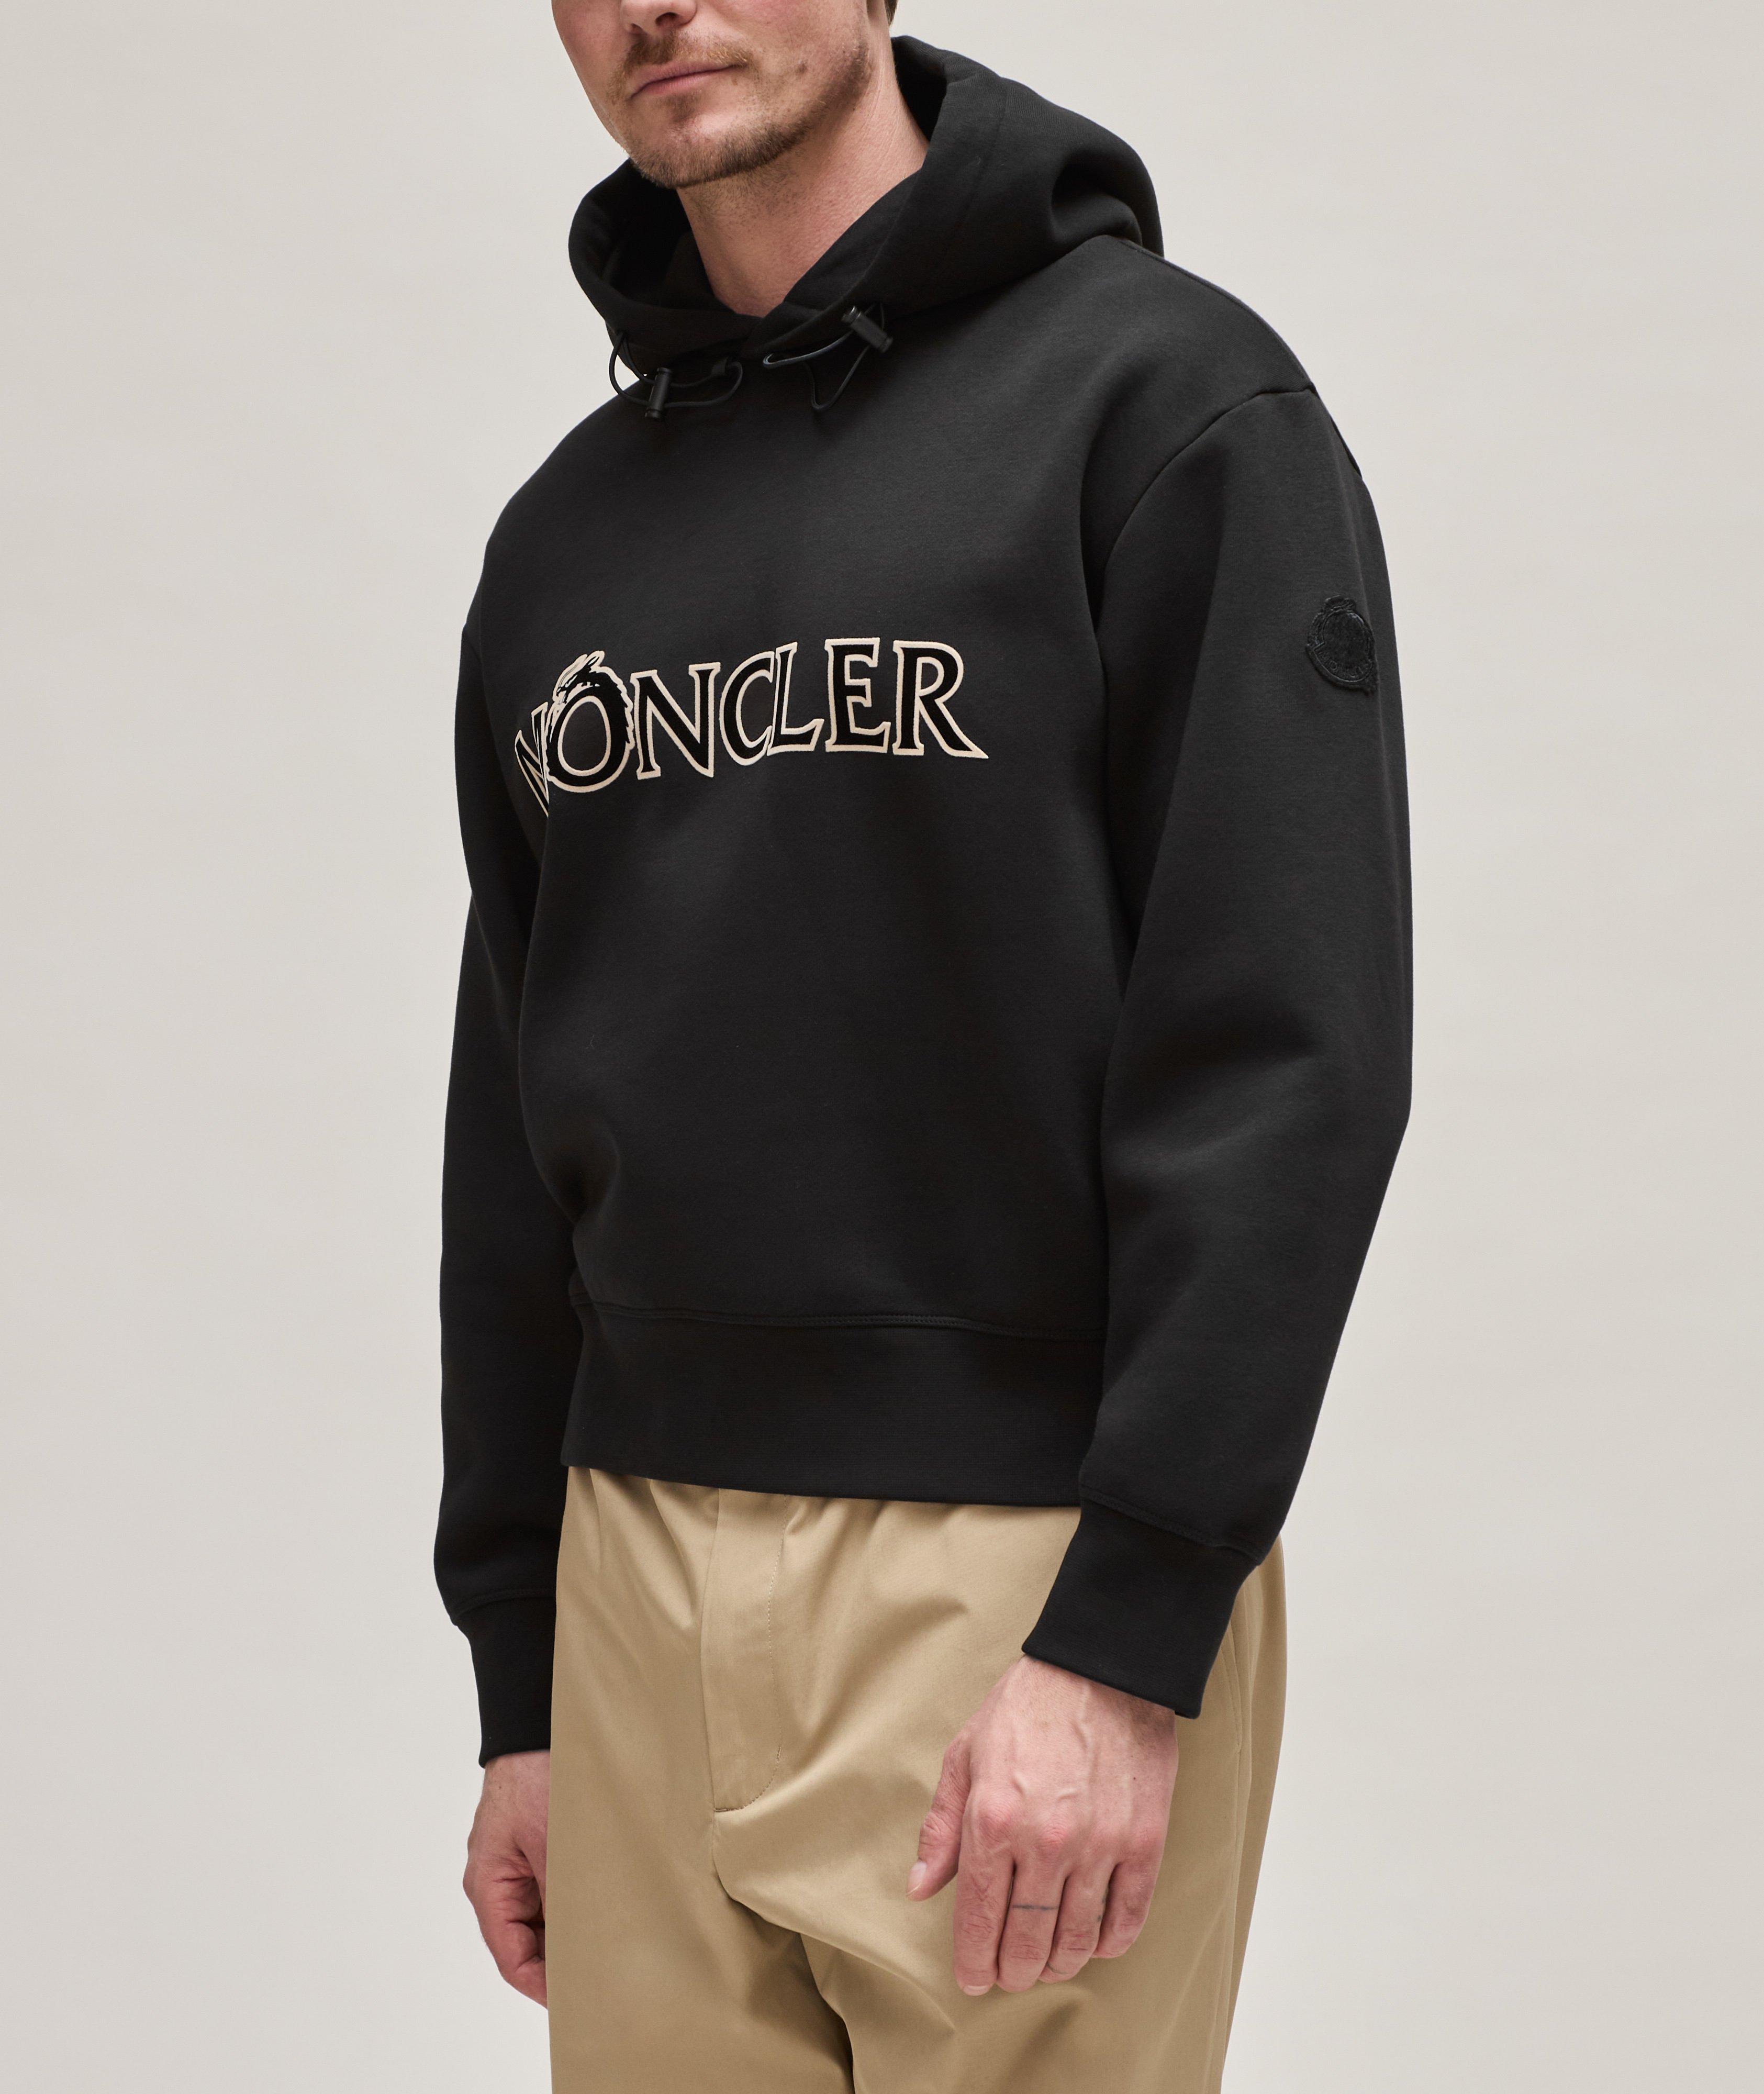 Year of the Dragon Hooded Sweater image 1